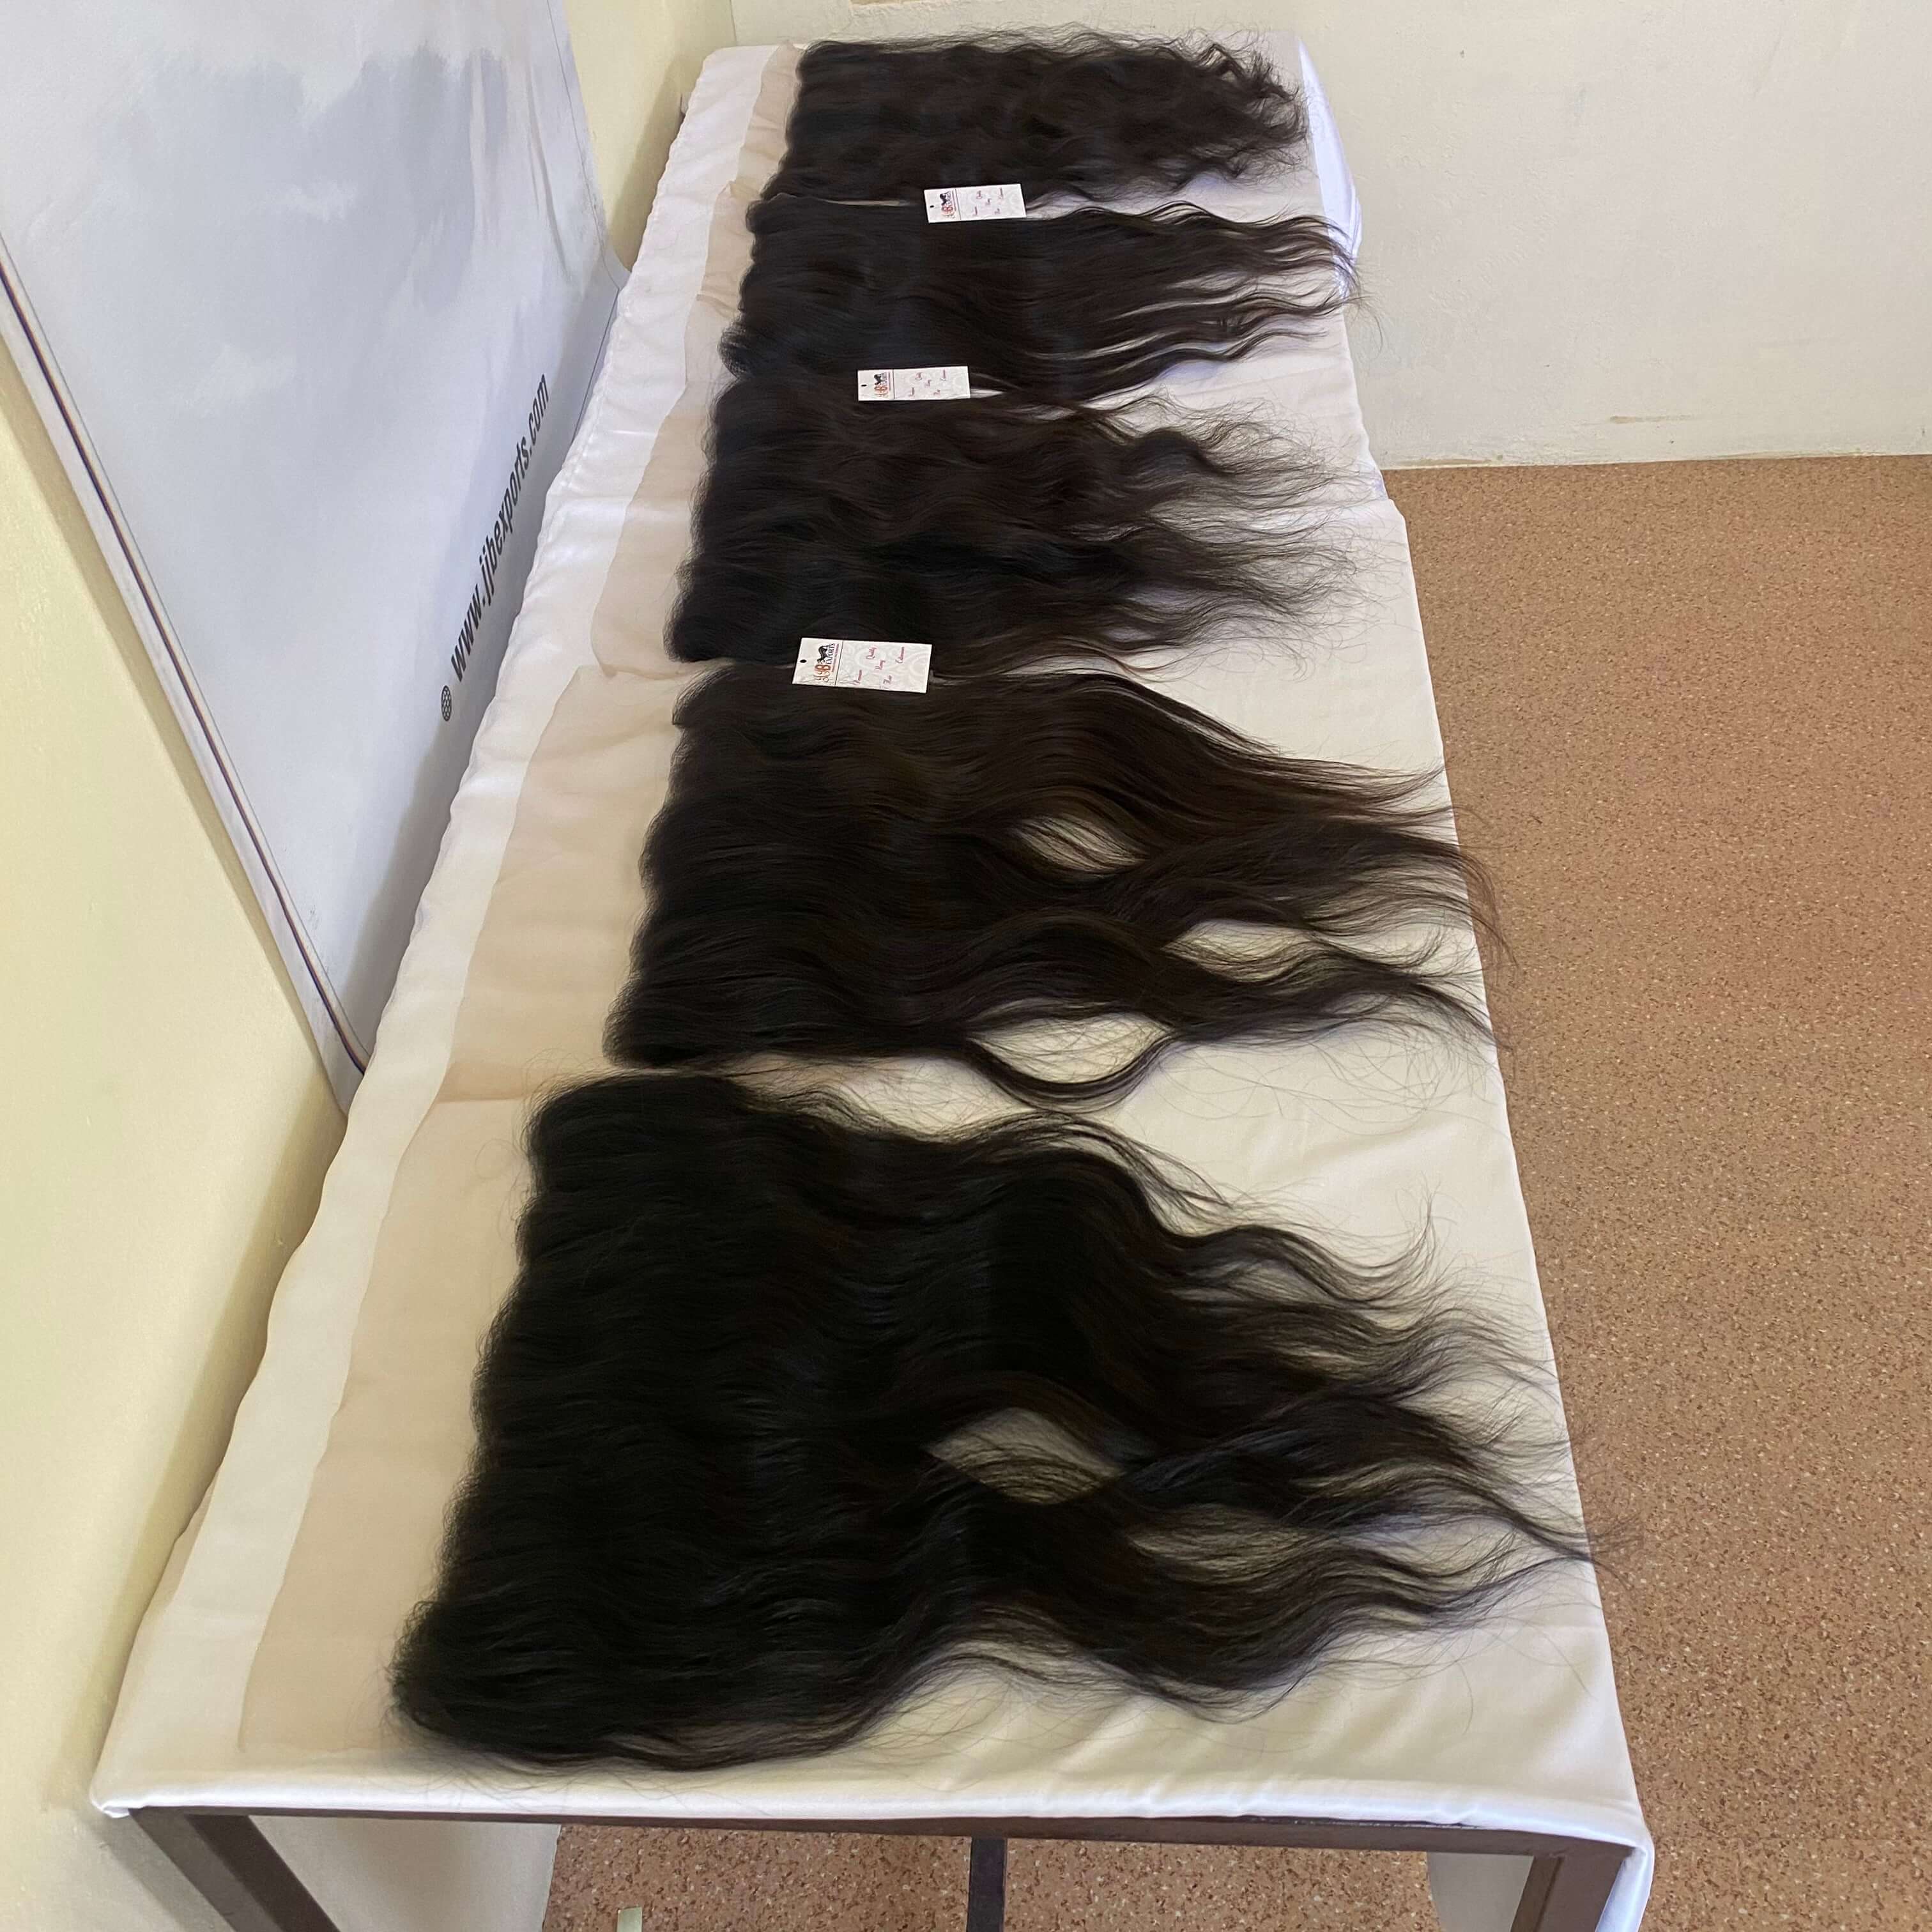 Cuticle Aligned Raw Virgin Hair Hd Lace Closures And 13x4 Frontals With Hair Bundles